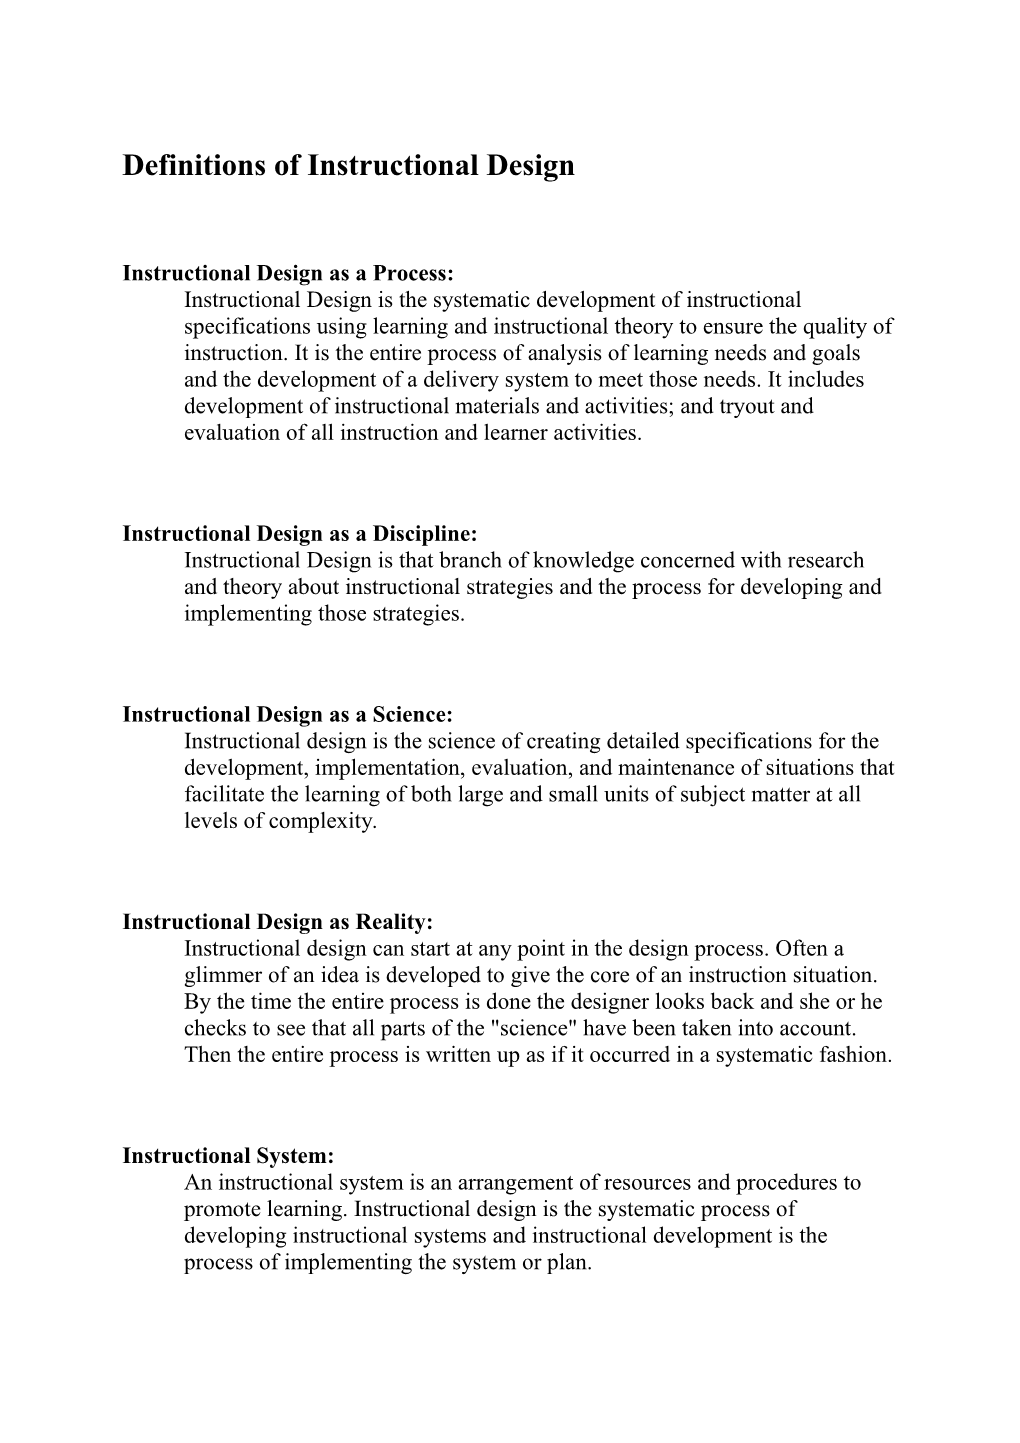 Definitions of Instructional Design